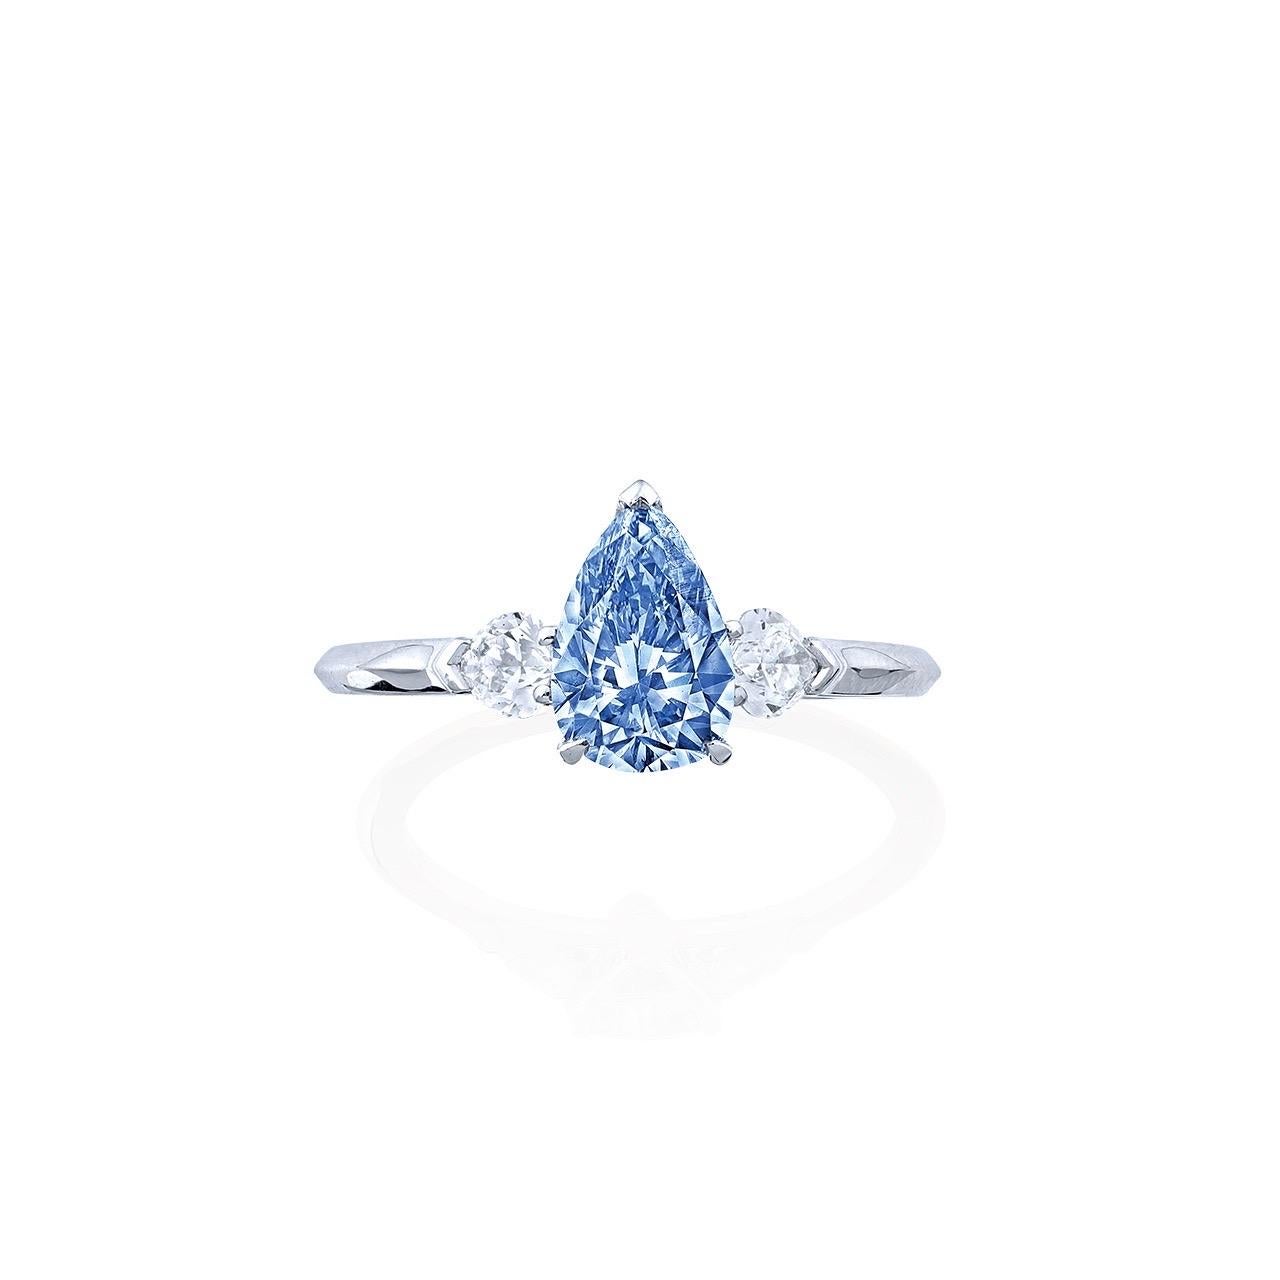 Main stone: 1.00++ carat Fancy Vivid Blue, VS2, Pear
Teardrop 
Setting: white diamonds totaling approximately 0.60 carats
From Emilio Jewelry, a well known and respected wholesaler/dealer located on New York’s iconic Fifth Avenue, 

Please inquire